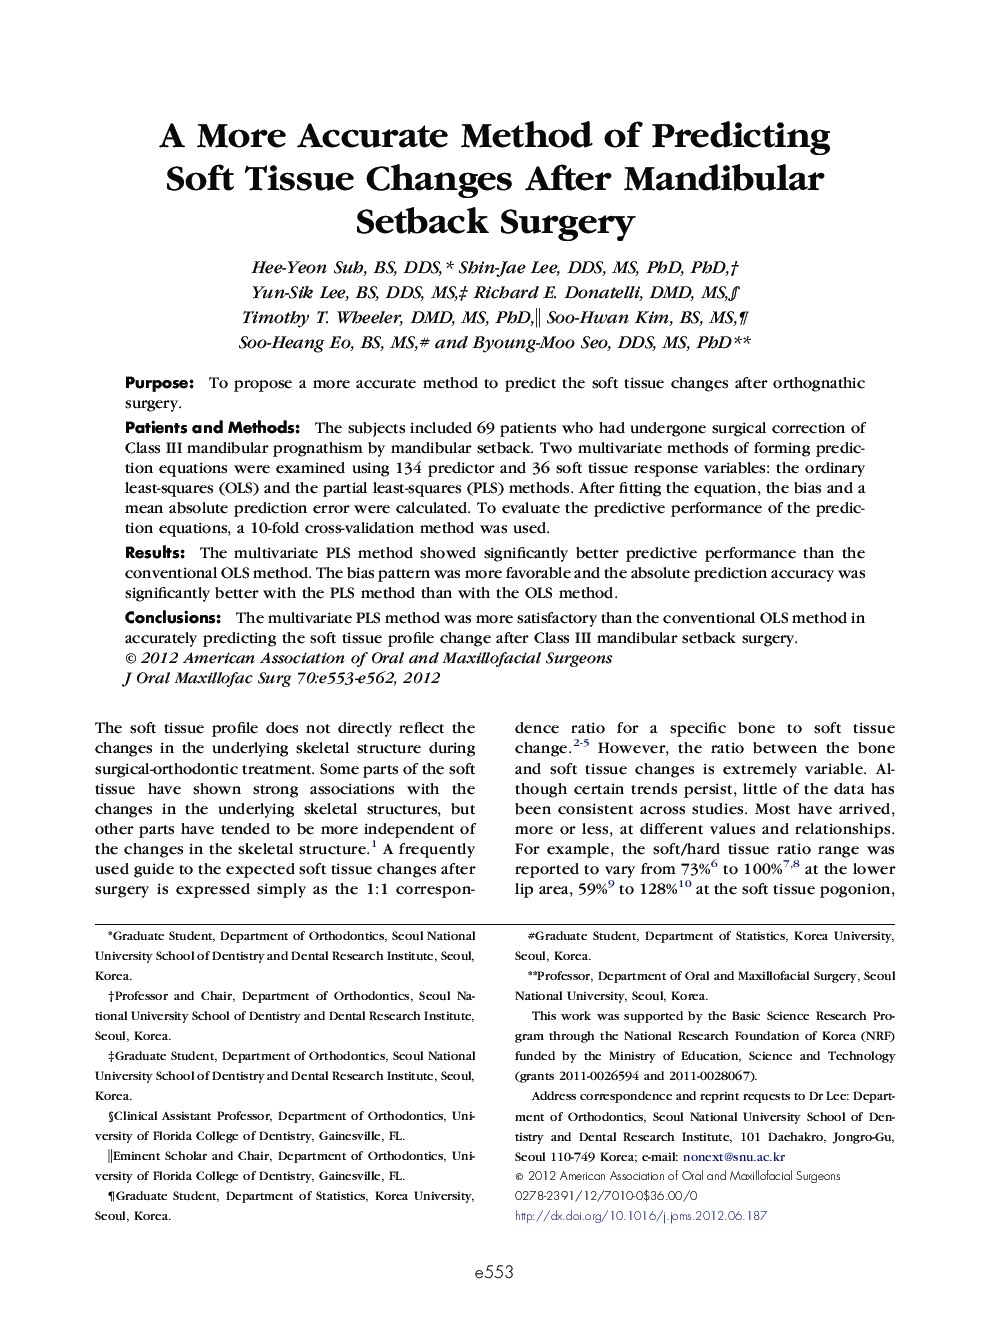 A More Accurate Method of Predicting Soft Tissue Changes After Mandibular Setback Surgery 